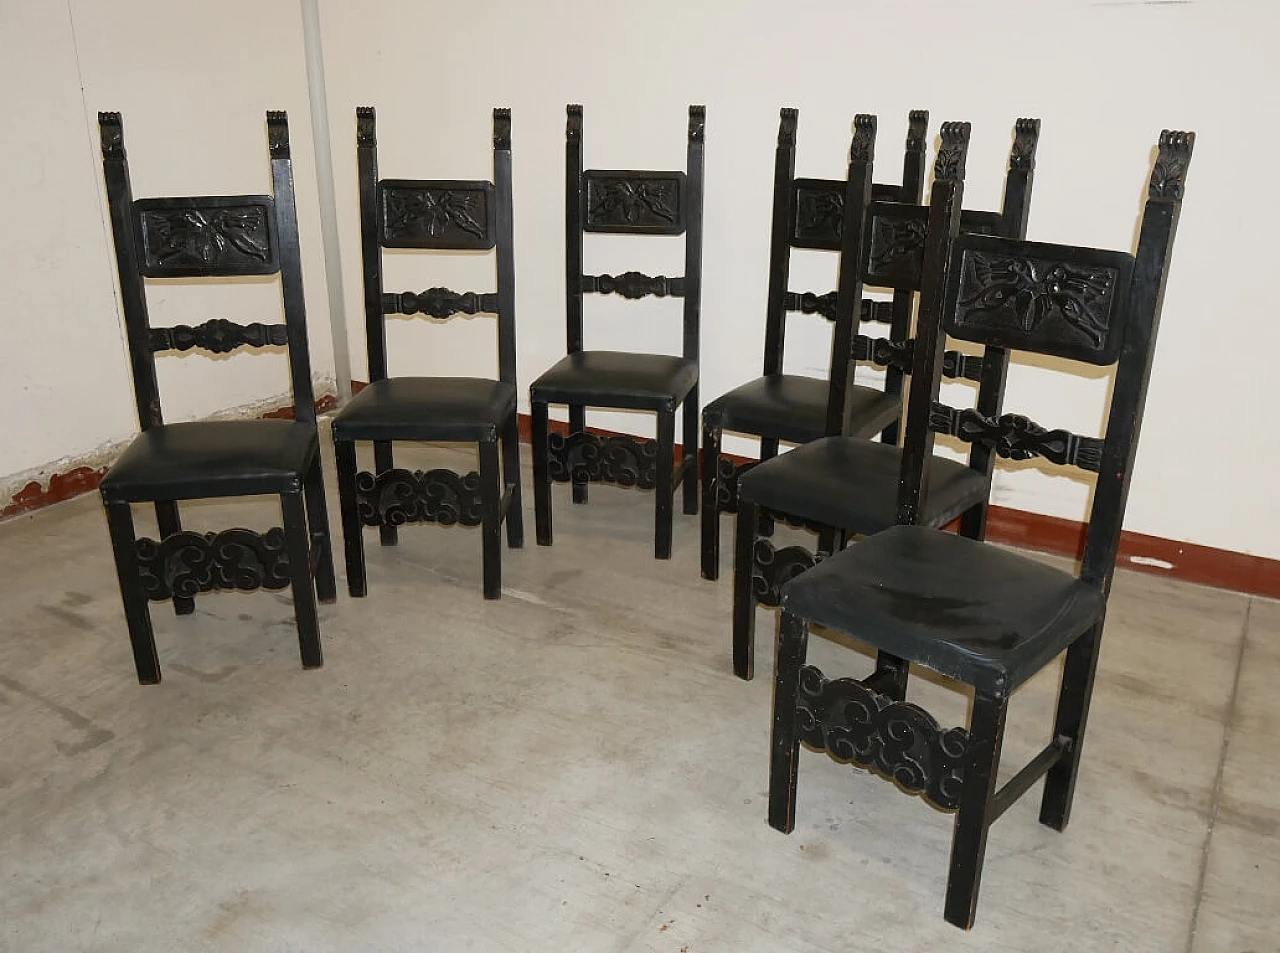 6 Renaissance-style chairs in black-stained wood, 1930s 1375422